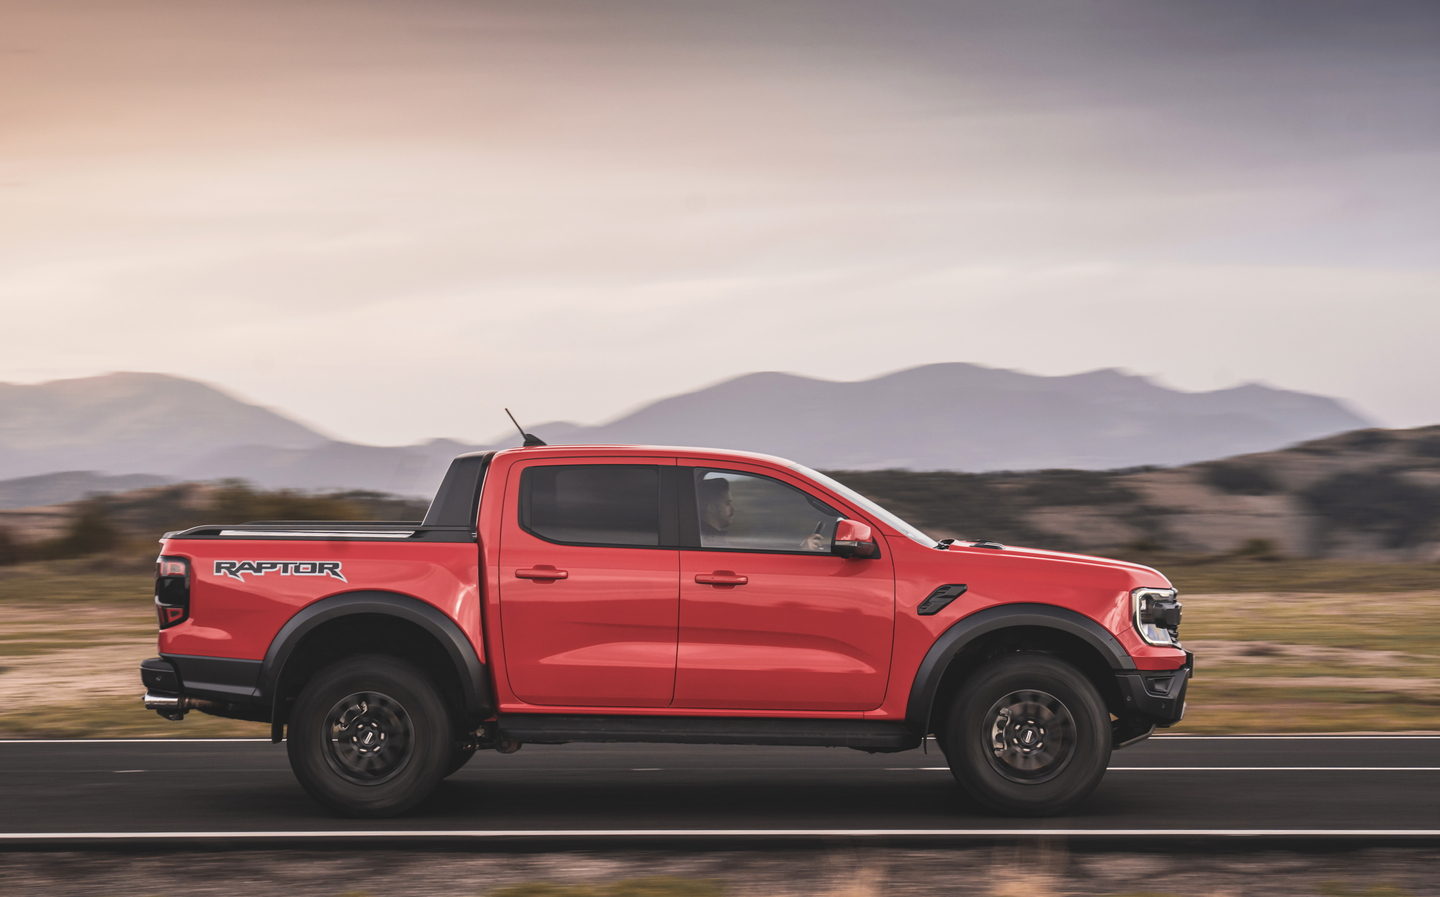 Ford Ranger Raptor 2022 review: American looks, brawny engine and serious  off-road capability set the Ranger apart from the Amarok